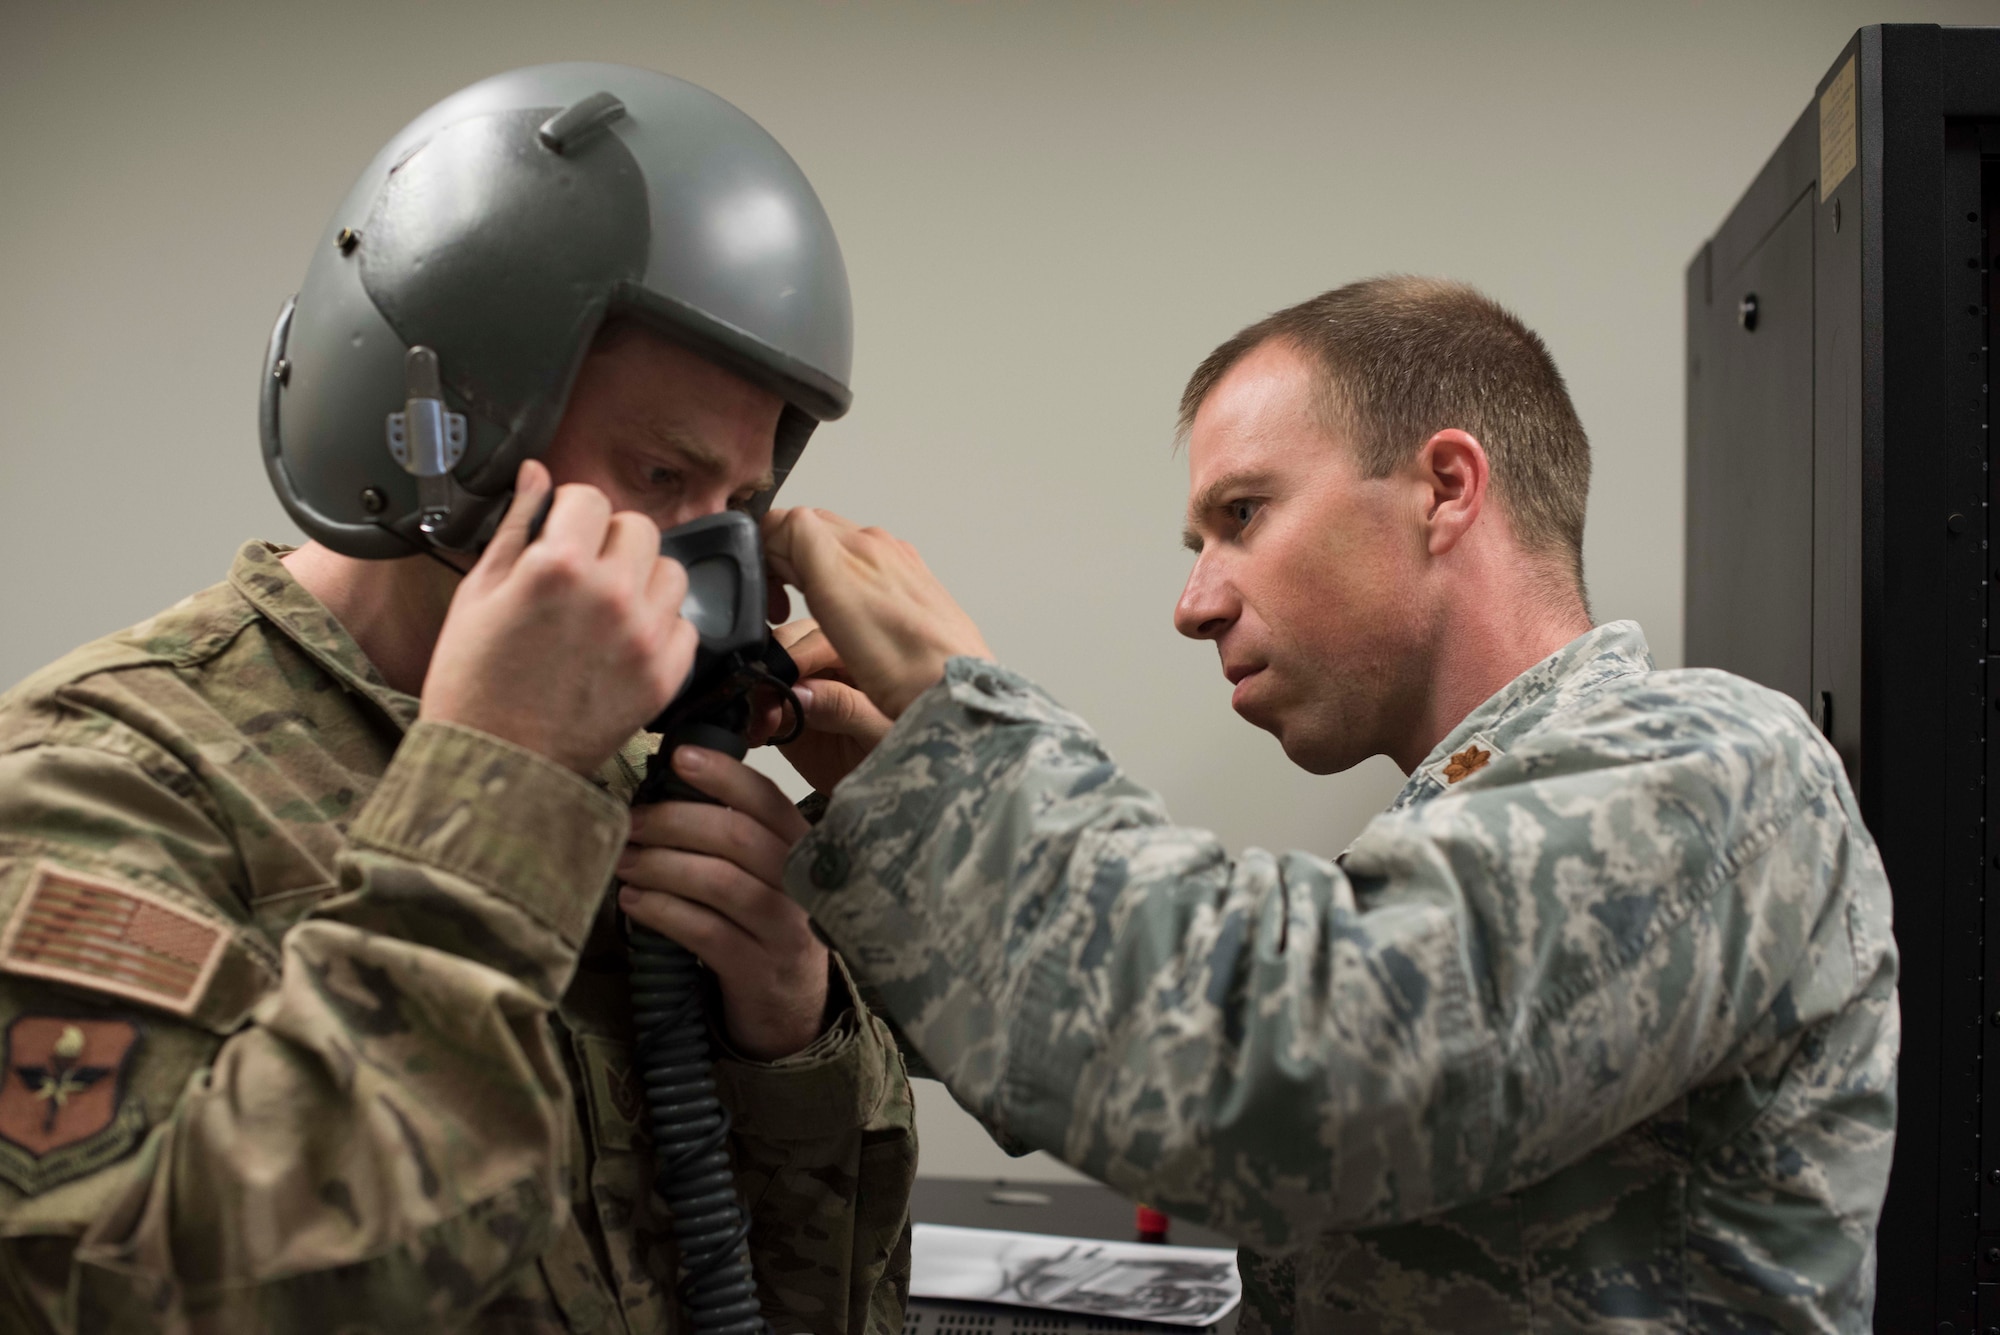 Maj. Zachary Garrett, 49th Medical Group Human Performance flight commander, fits a mask for Tech. Sgt. Jonathan Andrew, 49th MDG Education and Training flight chief, Jan. 11, 2019, on Holloman Air Force Base, N.M. As an aerospace physiologist, Garrett conducts hypoxia recognition and recovery training and studies human factors in the flight environment for 49th Wing aircrew. (U.S. Air Force photo by Staff Sgt. BreeAnn Sachs)